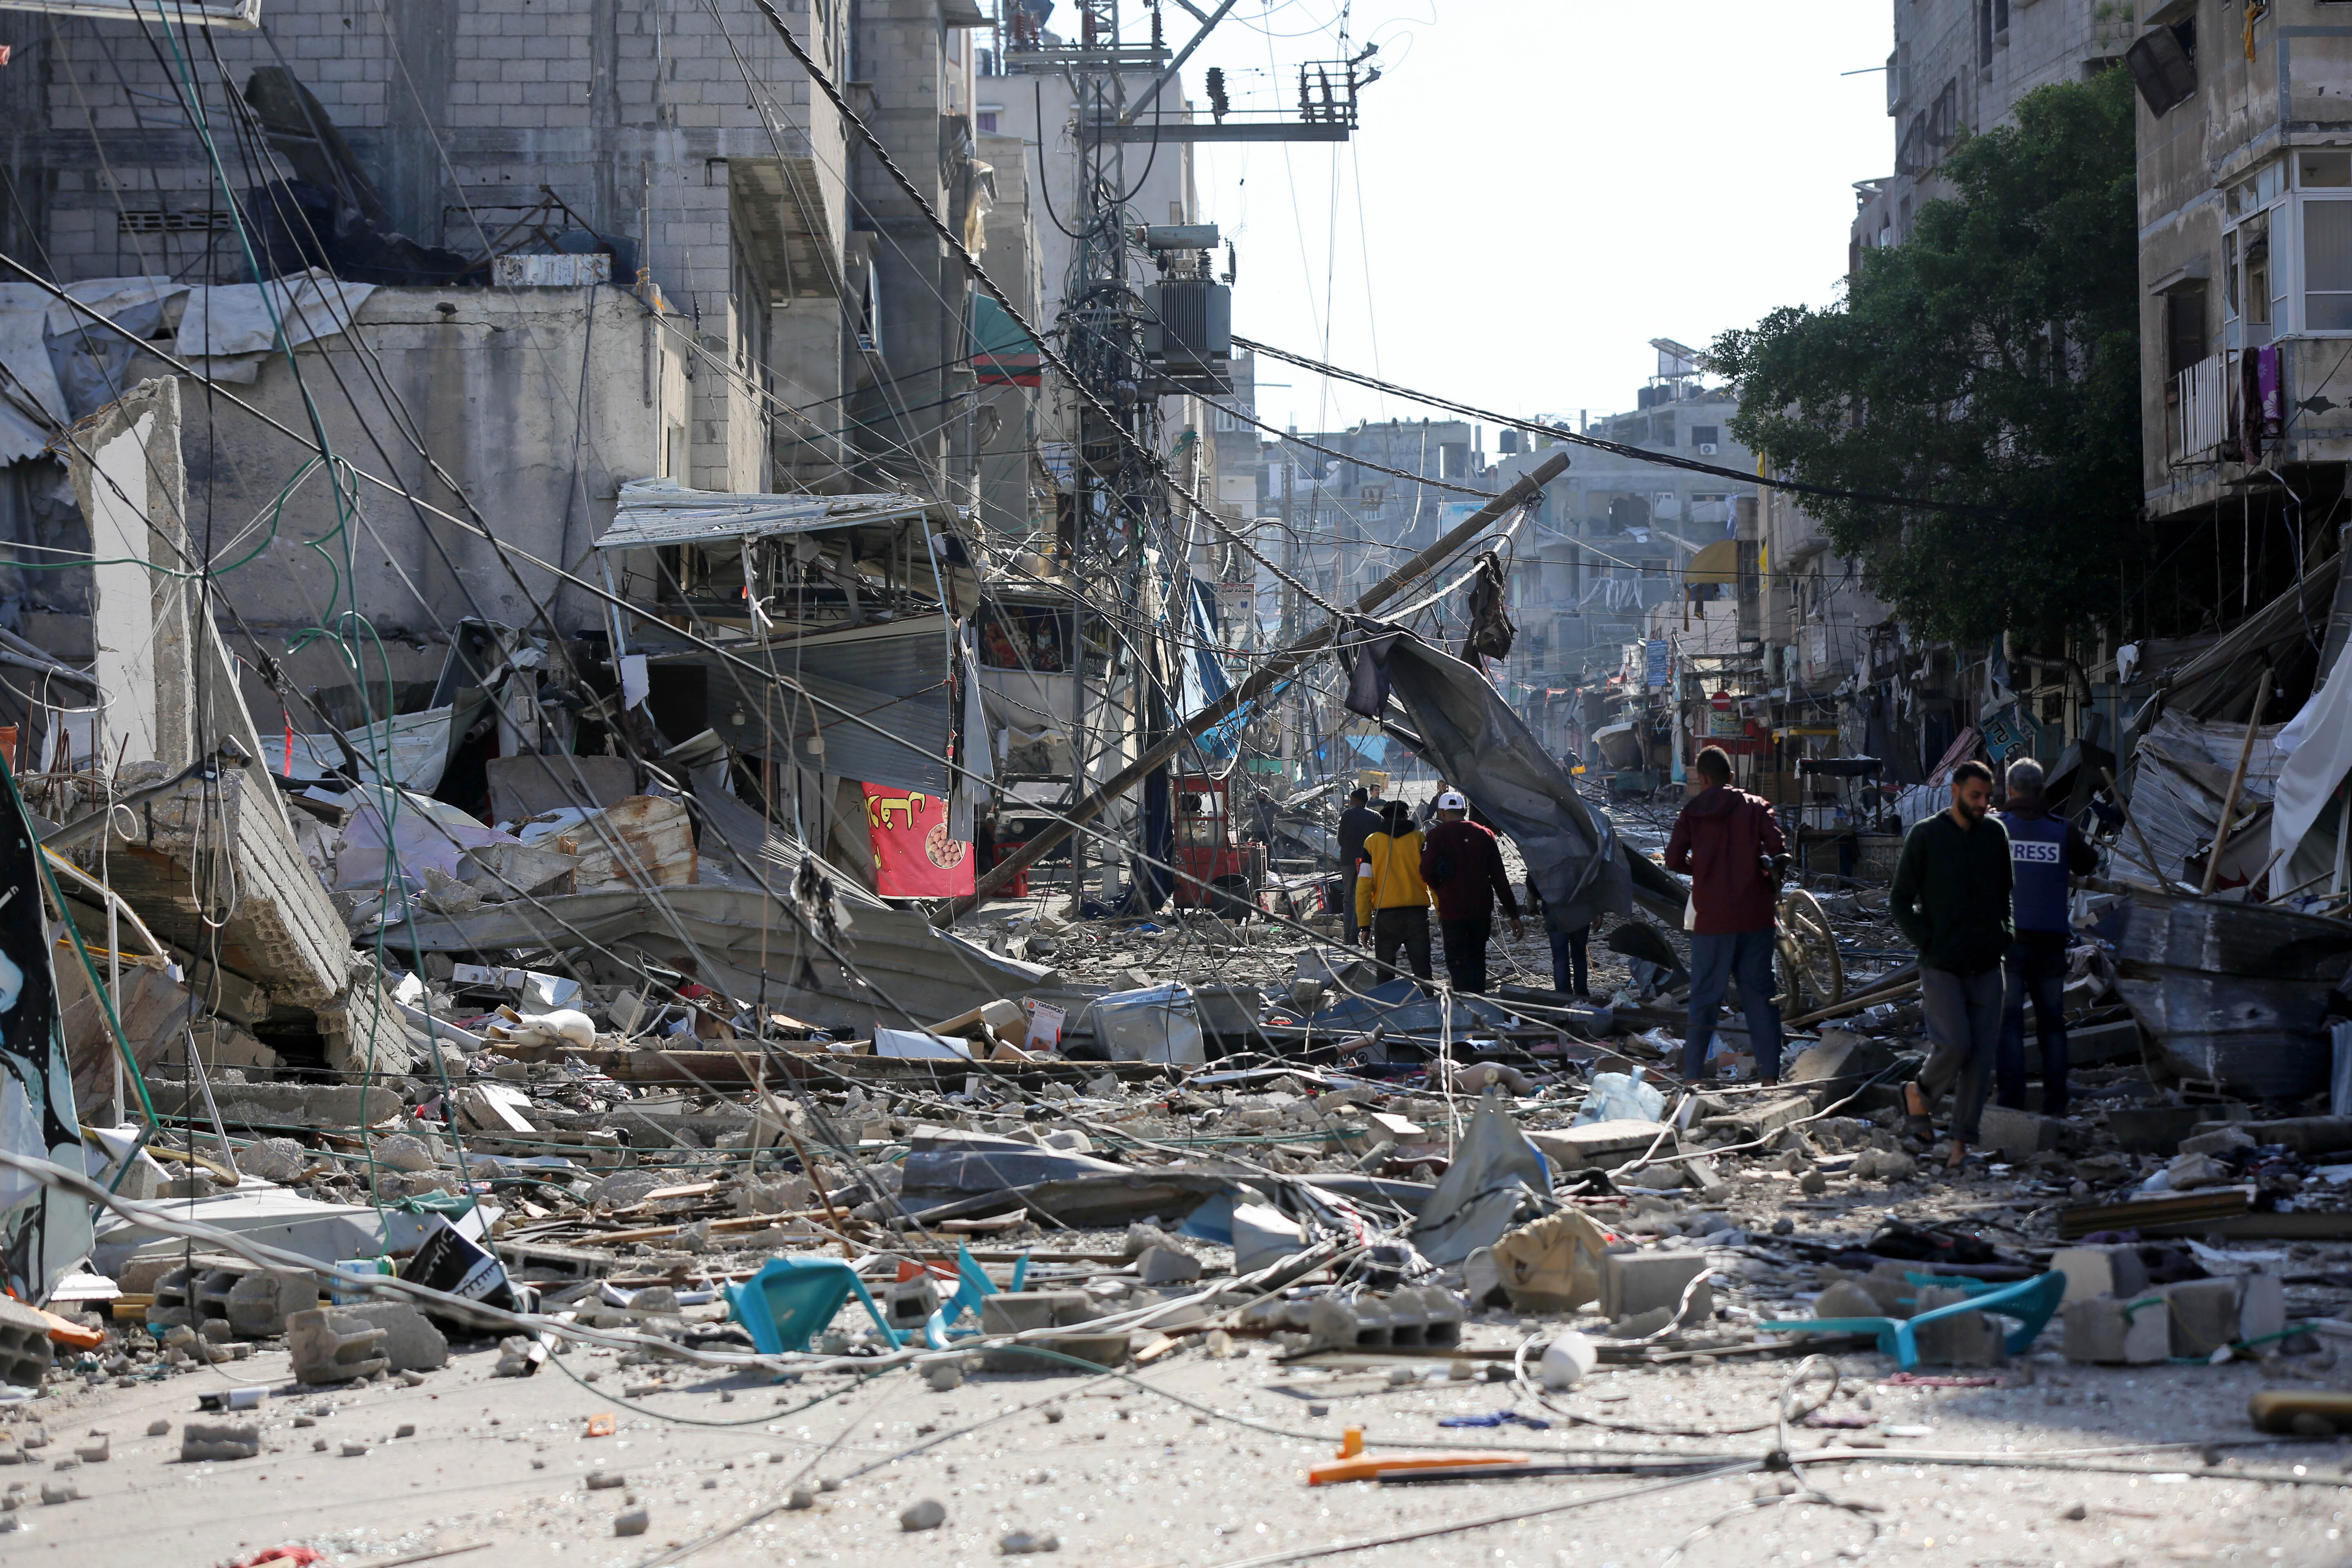 bombed city left in ruin as people try to walk the streets